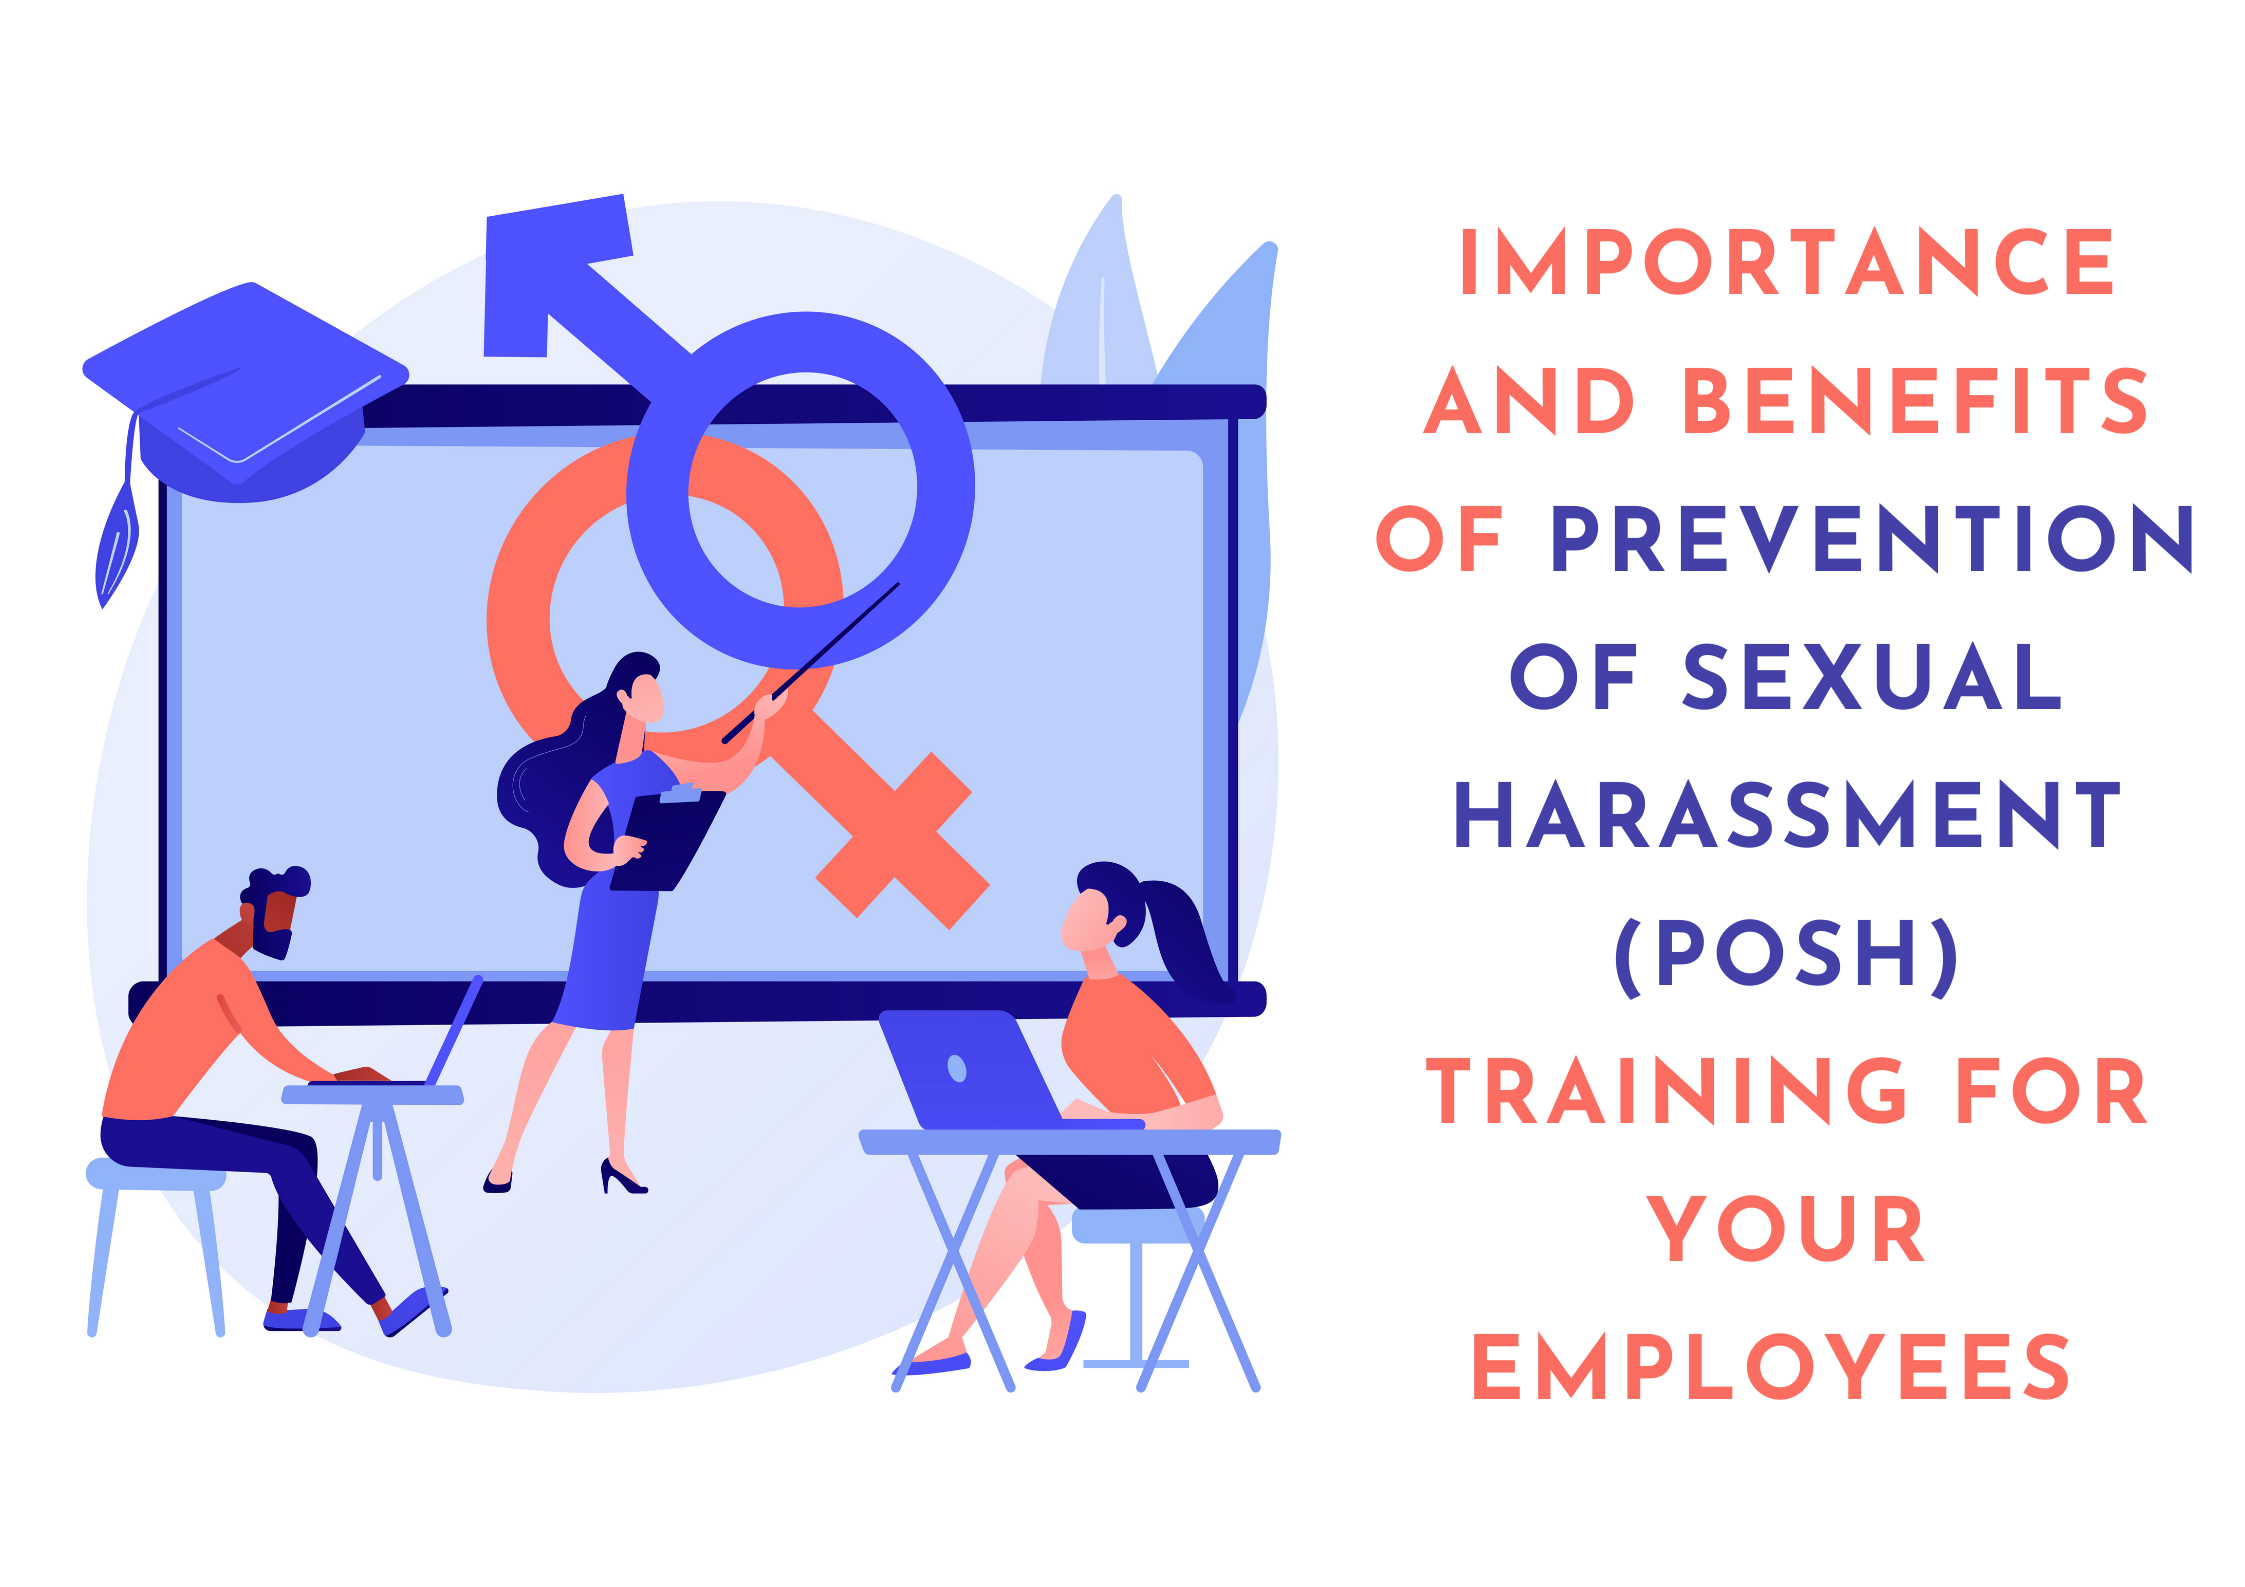 Importance And Benefits Of Prevention Of Sexual Harassment Training Posh For Your Employees 7608